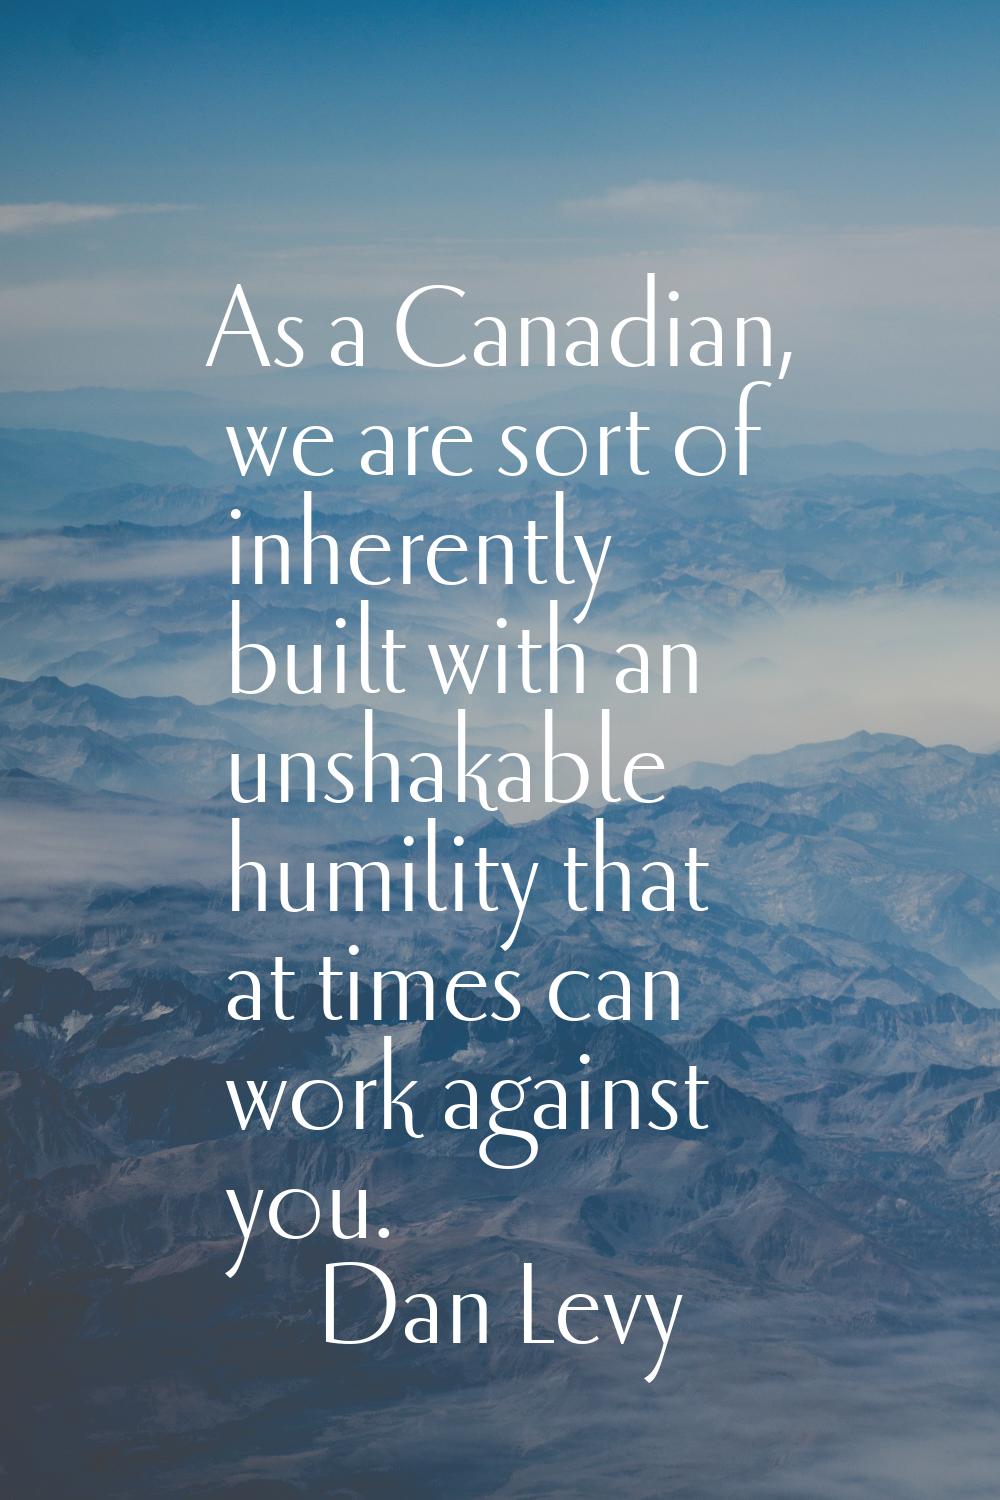 As a Canadian, we are sort of inherently built with an unshakable humility that at times can work a